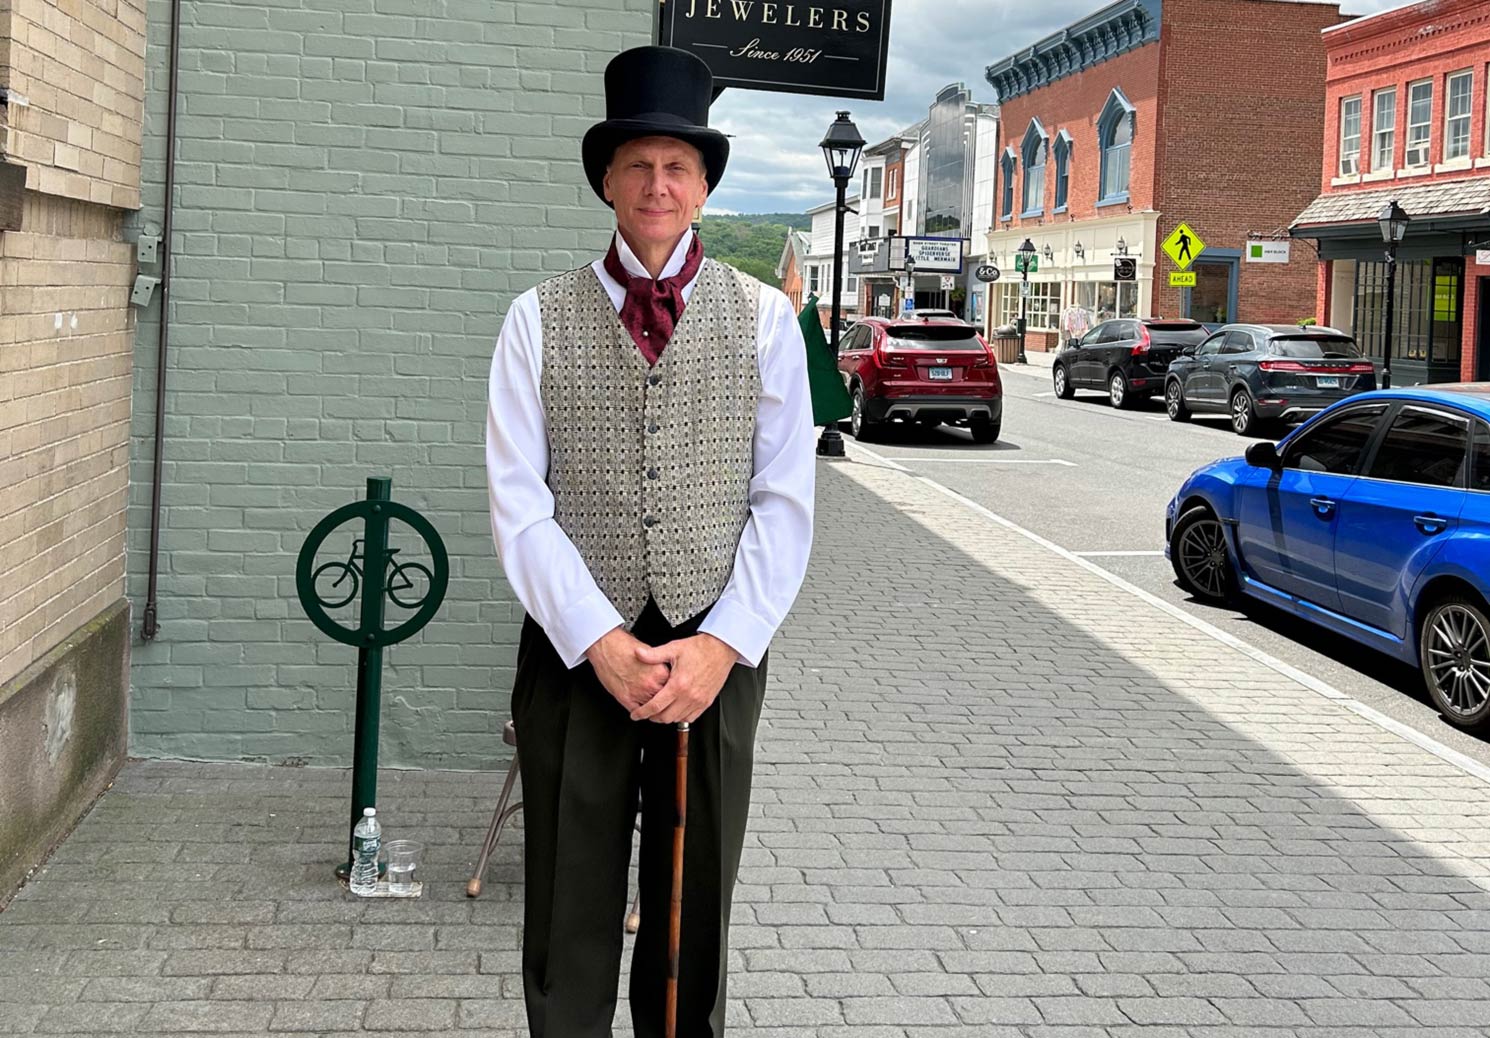  Thank you to all who had a part in our newest event. Board member, Joe Cats, was instrumental in organizing the Historical walk depicting the Great Fire of 1902